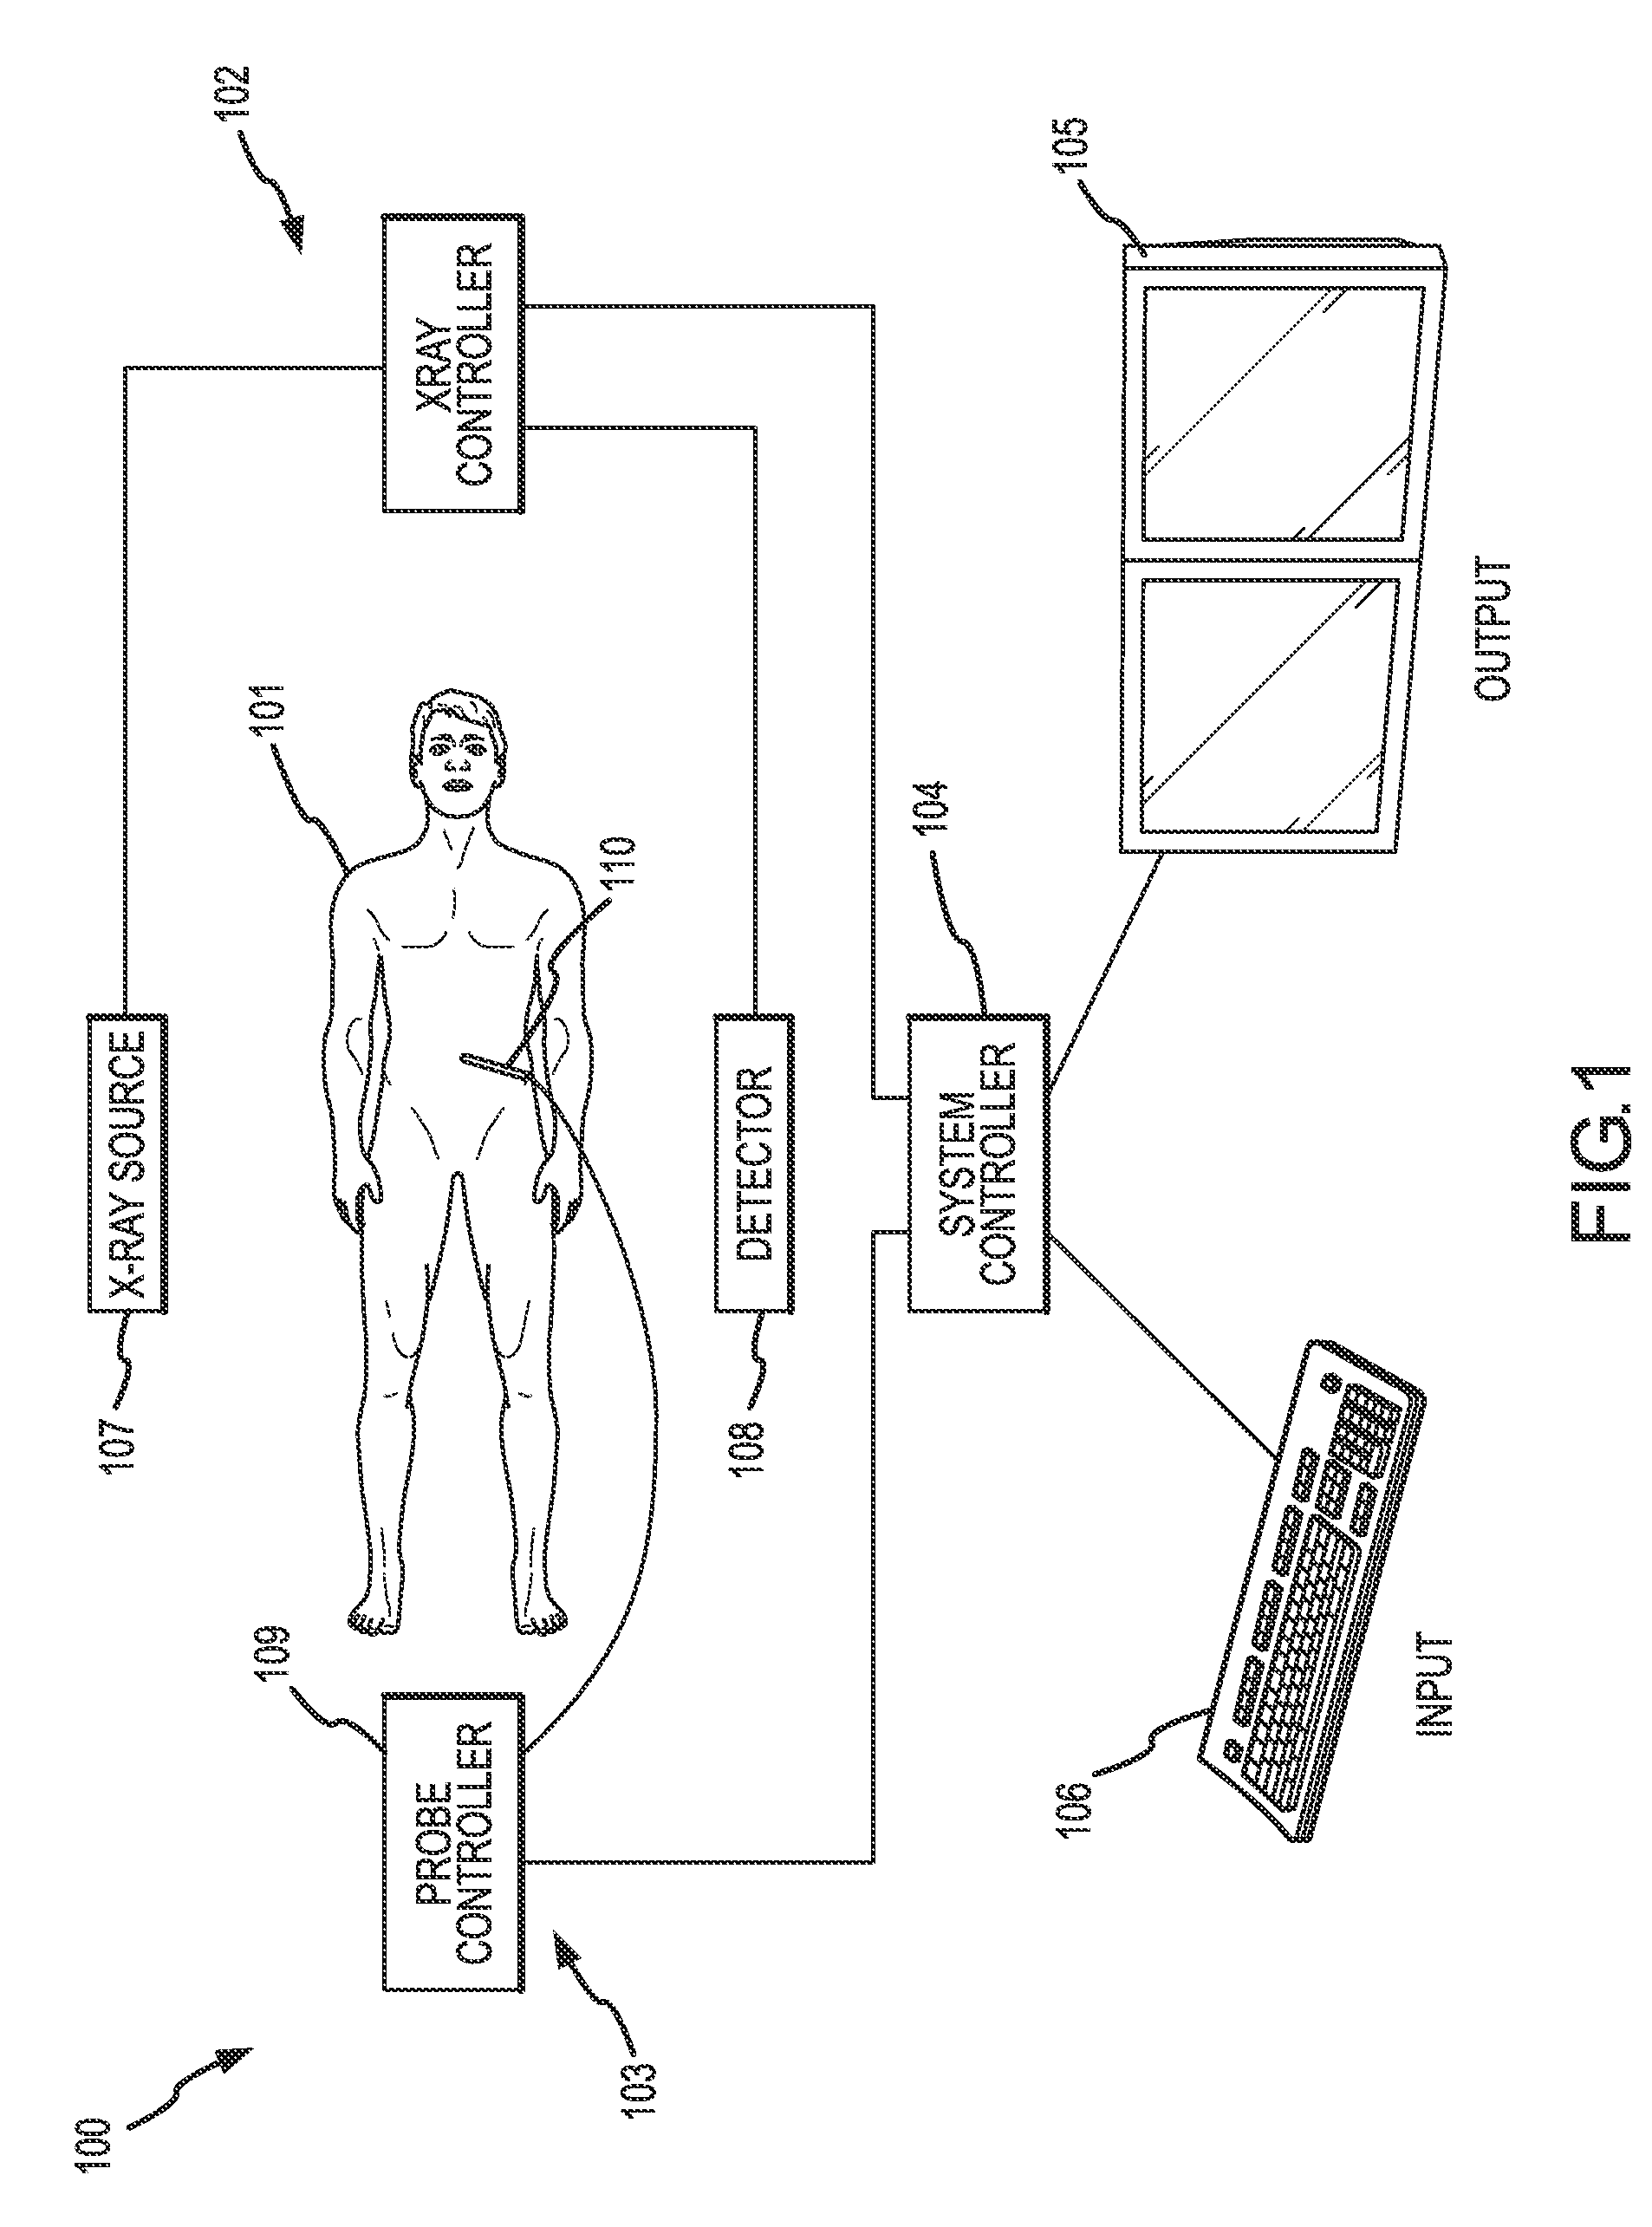 Methods and apparatuses for planning, performing, monitoring and assessing thermal ablation